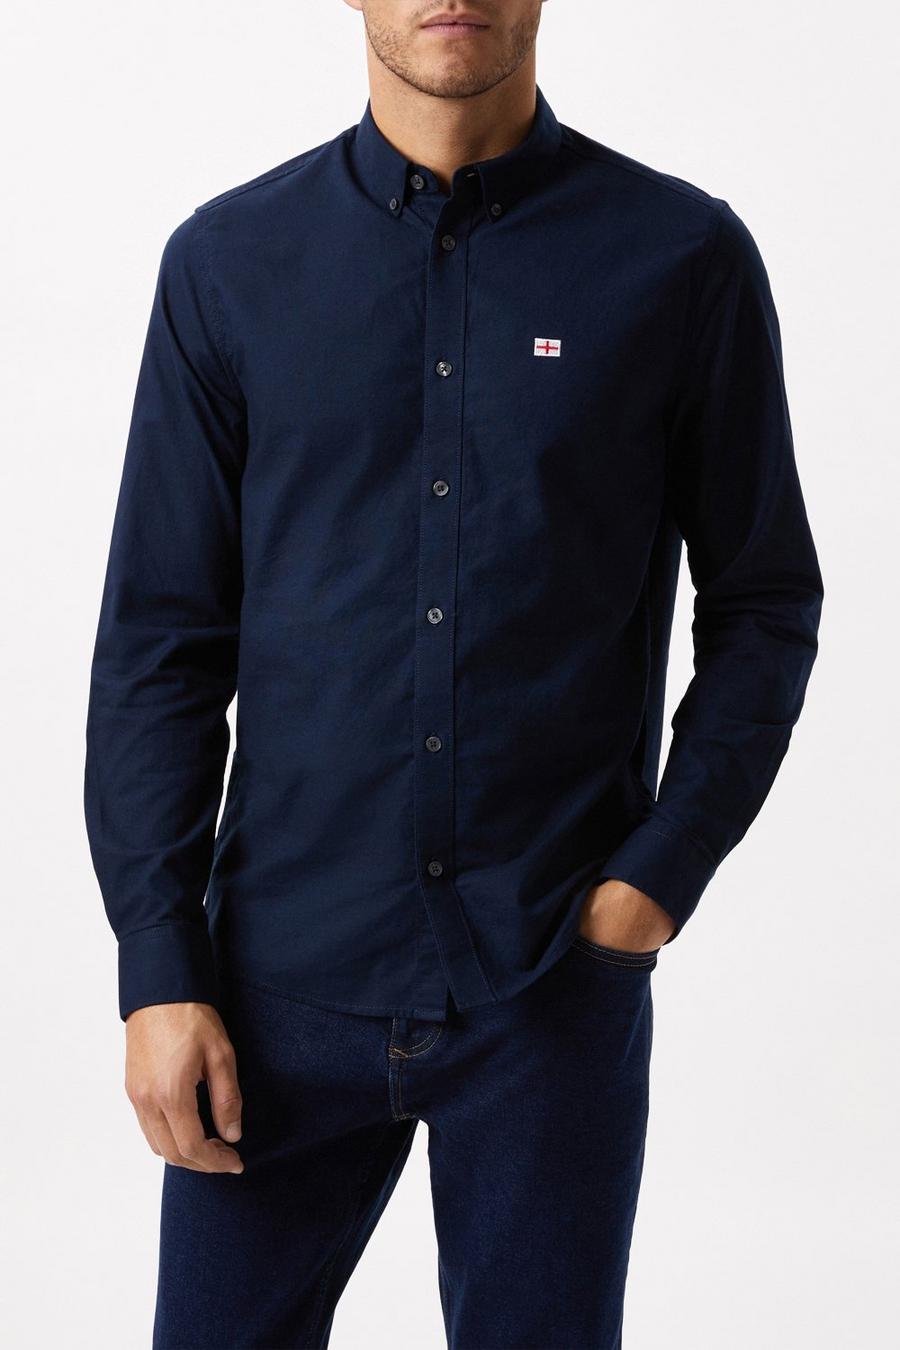 Navy Oxford Shirt With England Flag